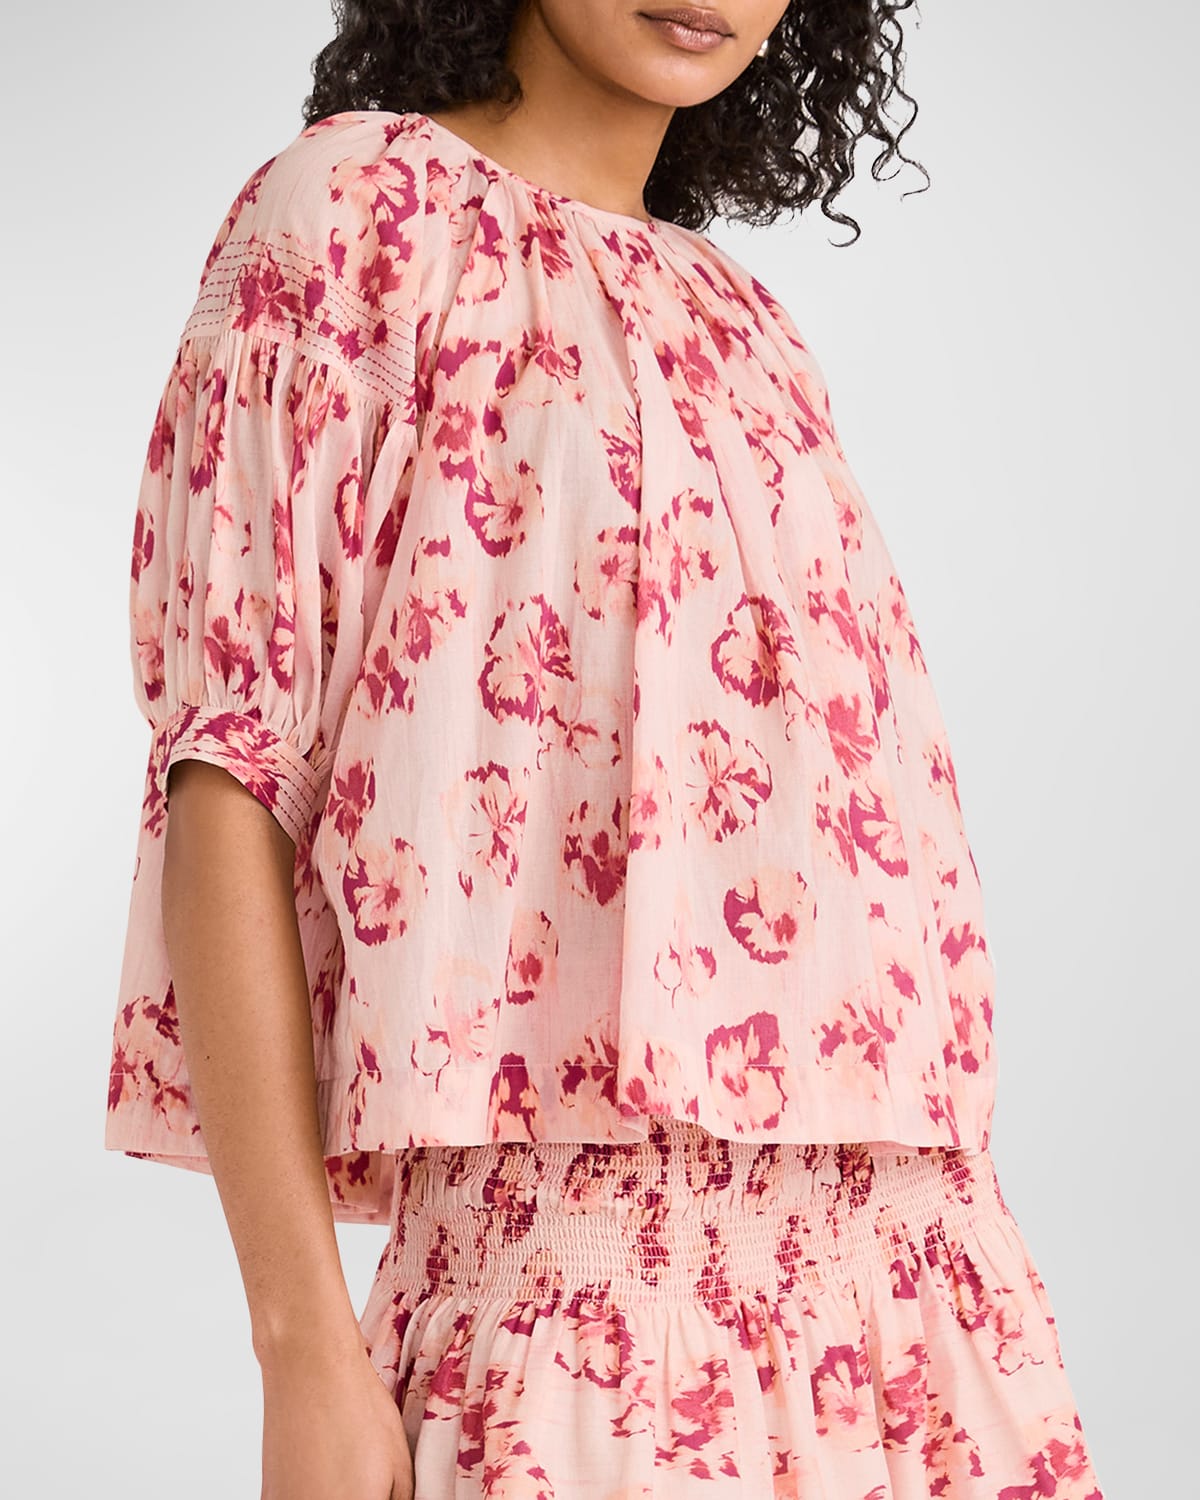 Merlette Zenith Top In Orchid Ikat Floral Print